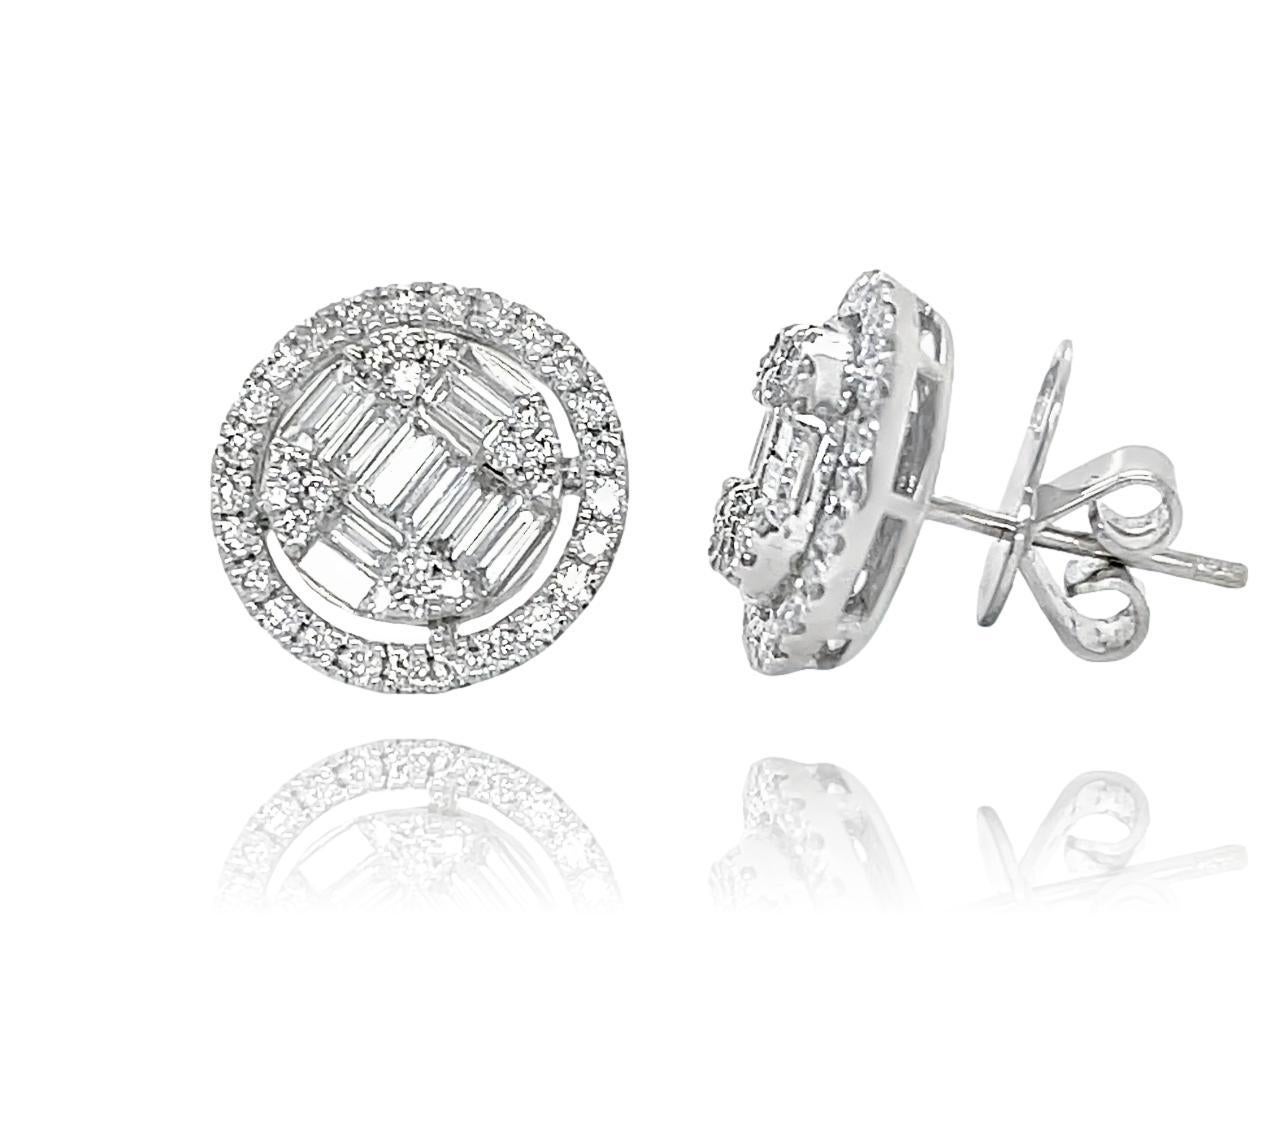 These stunning invisible set diamond stud earrings are surrounded with natural brilliant cut white round and baguette diamonds all set in 14K gold. They have double push back closure for extra security and snug fit. These earrings come in a